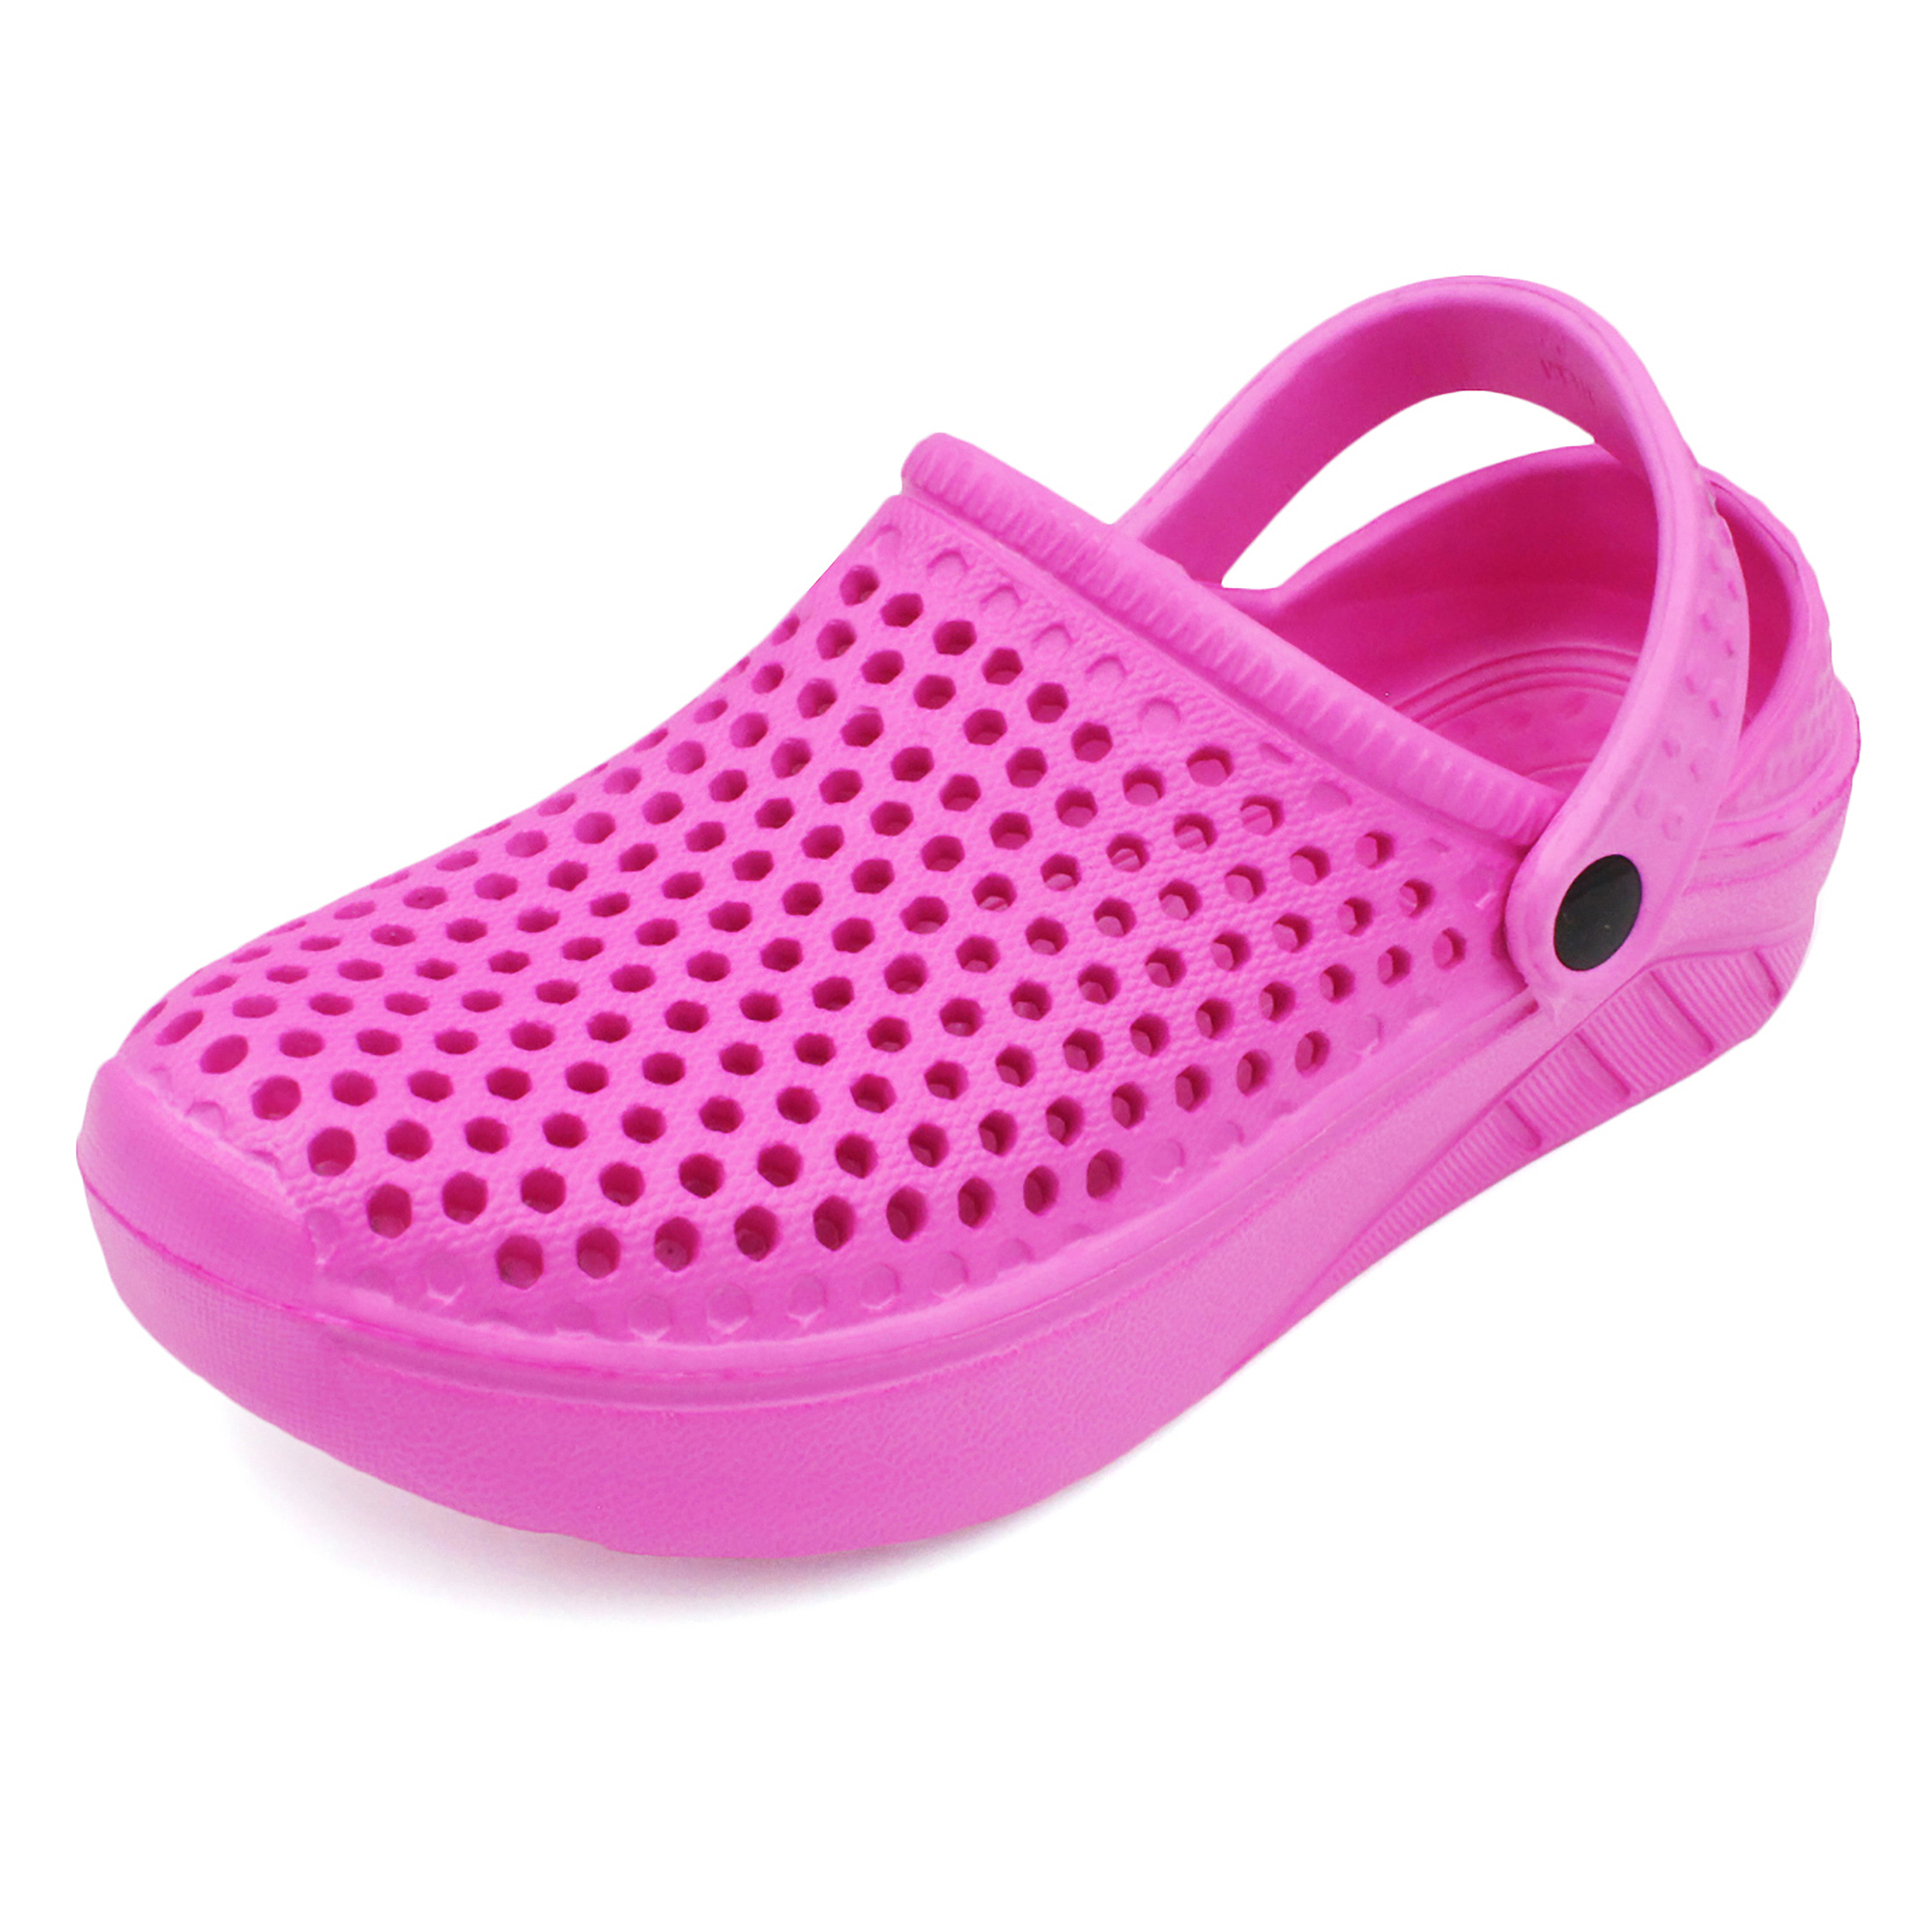 Garden Clogs Shoes For Girl Kids Toddler Slip-On Casual Two-tone Slipper Sandals 